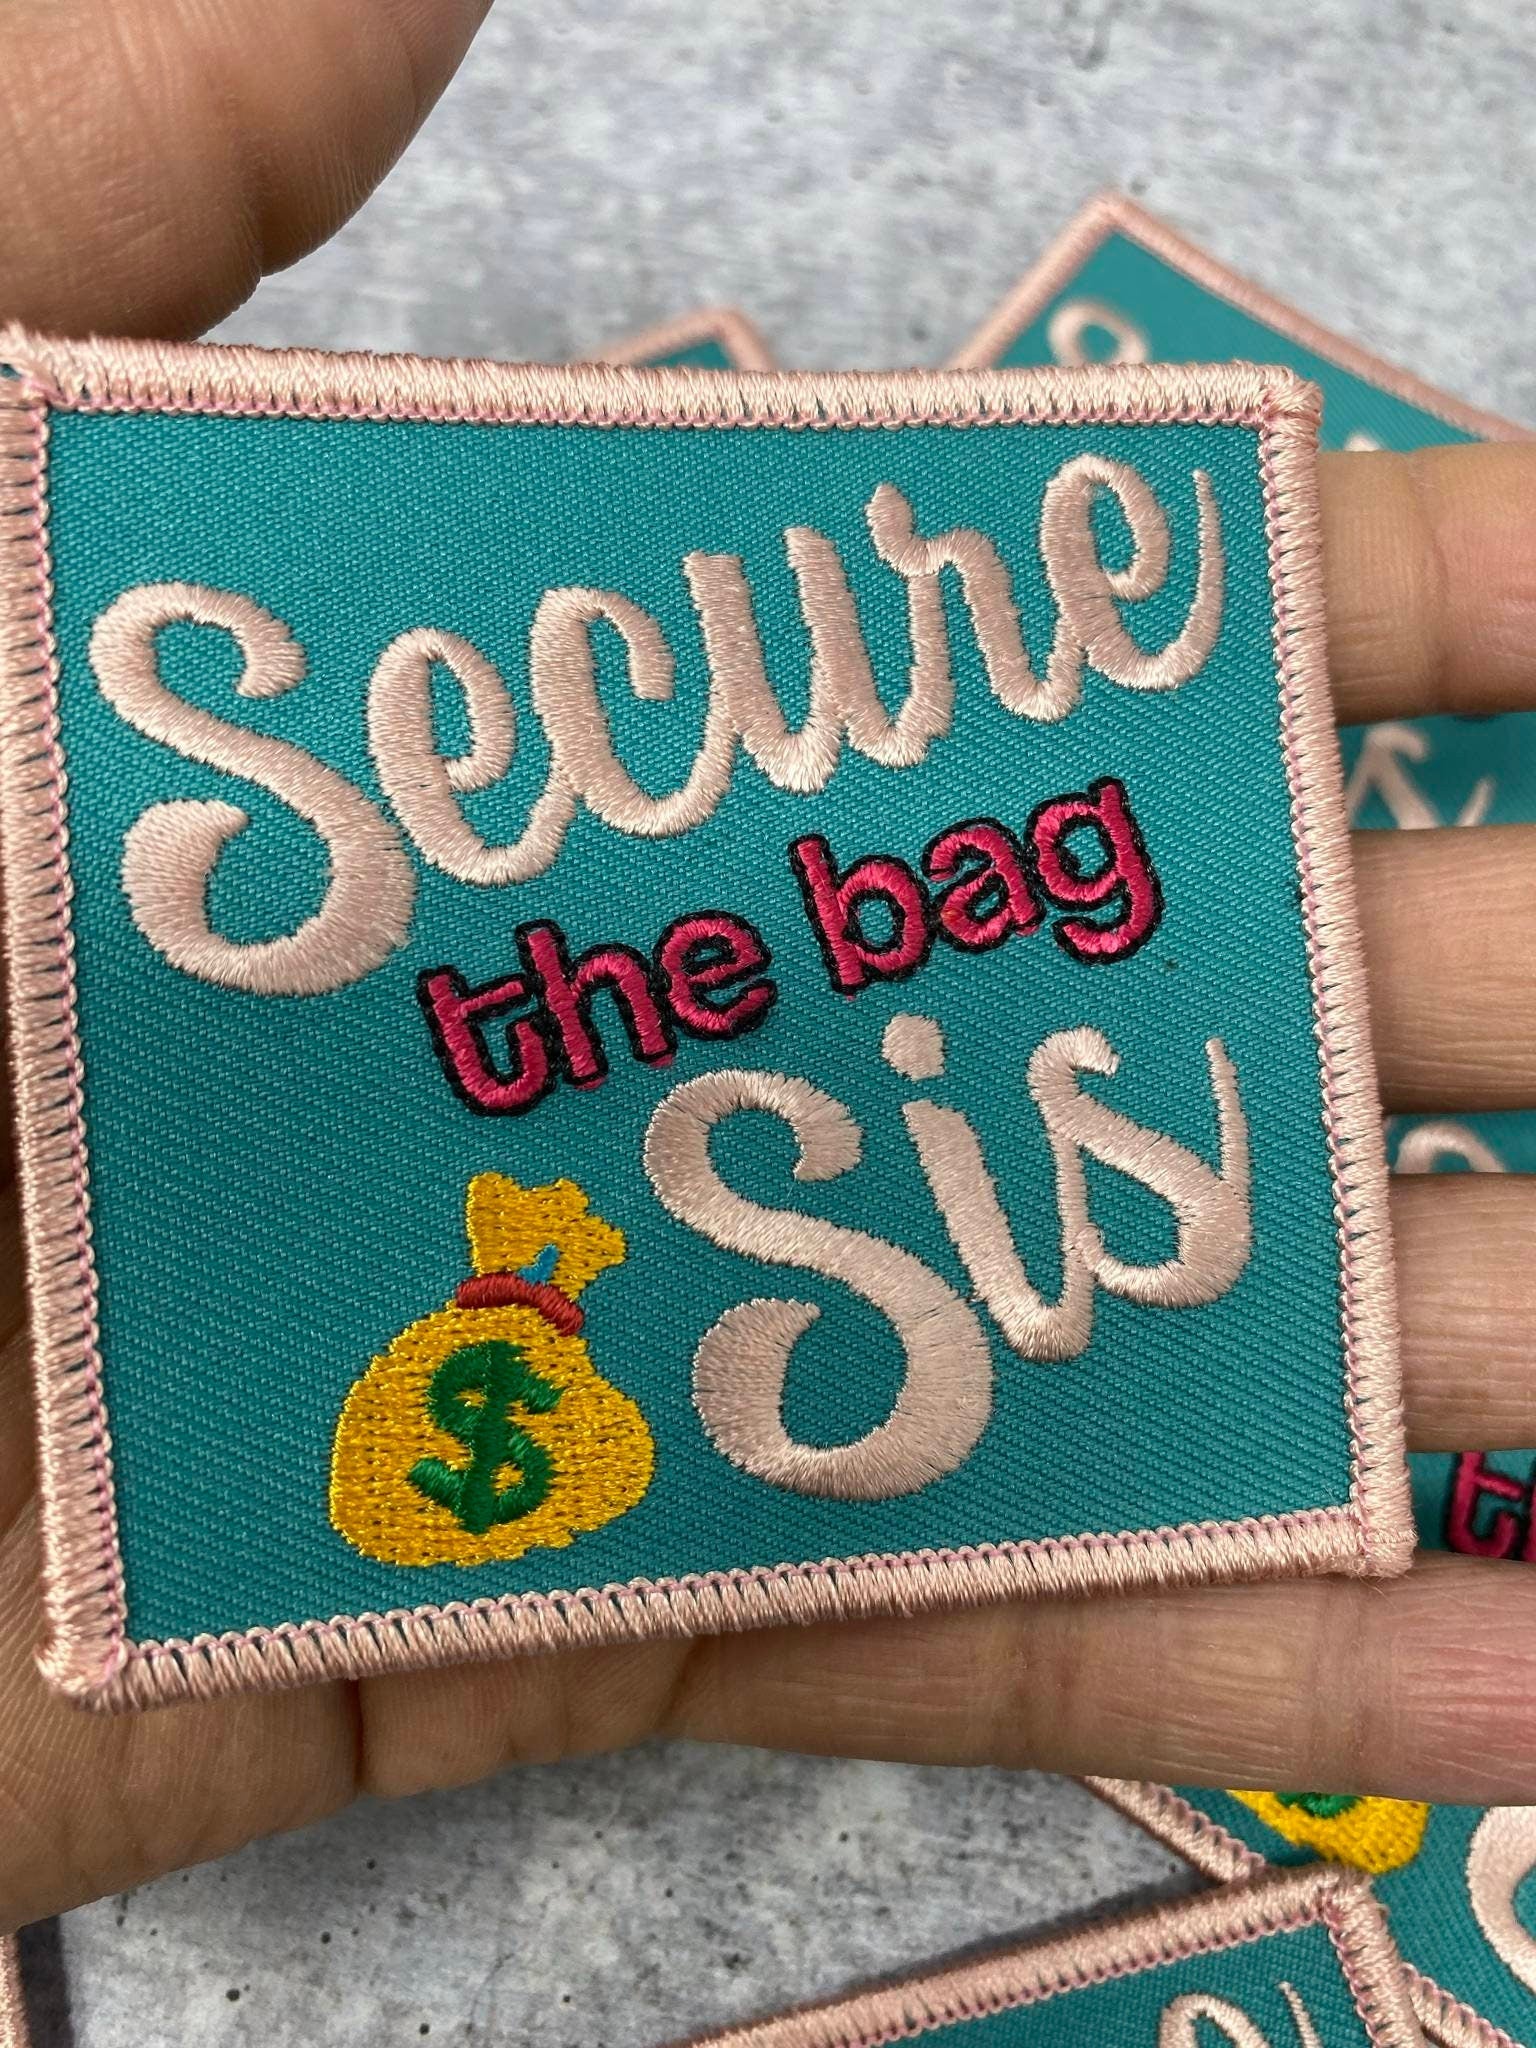 New, "Secure the Bag, sis", Light Pink Border, Iron-on Embroidered Patch; Positive Vibes; Feminists, Girl Power Patch, Size 3"x3"